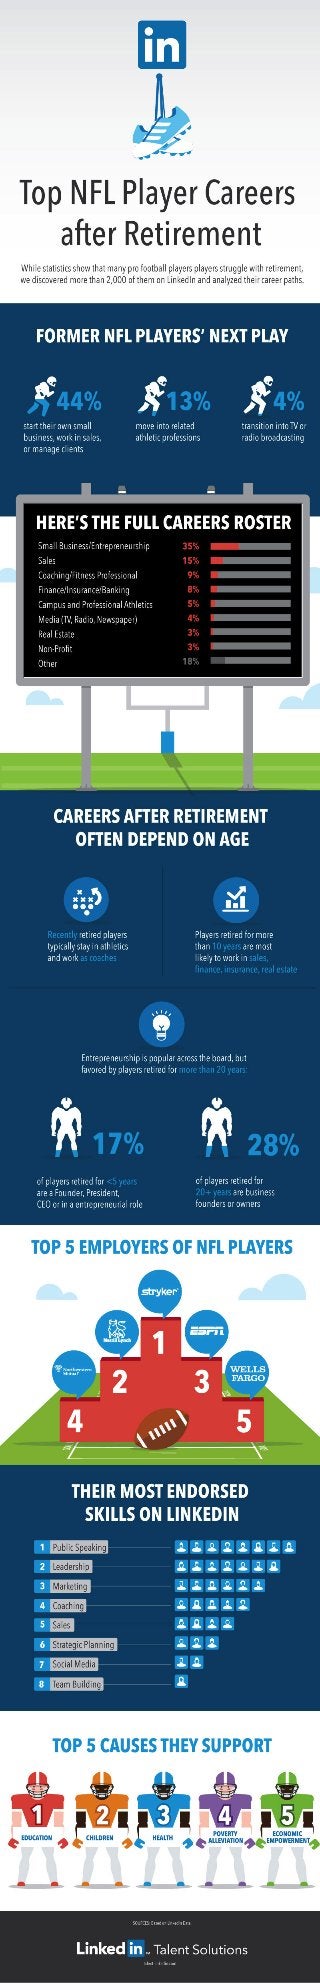 Top NFL Players Careers After Retirement | Infographic